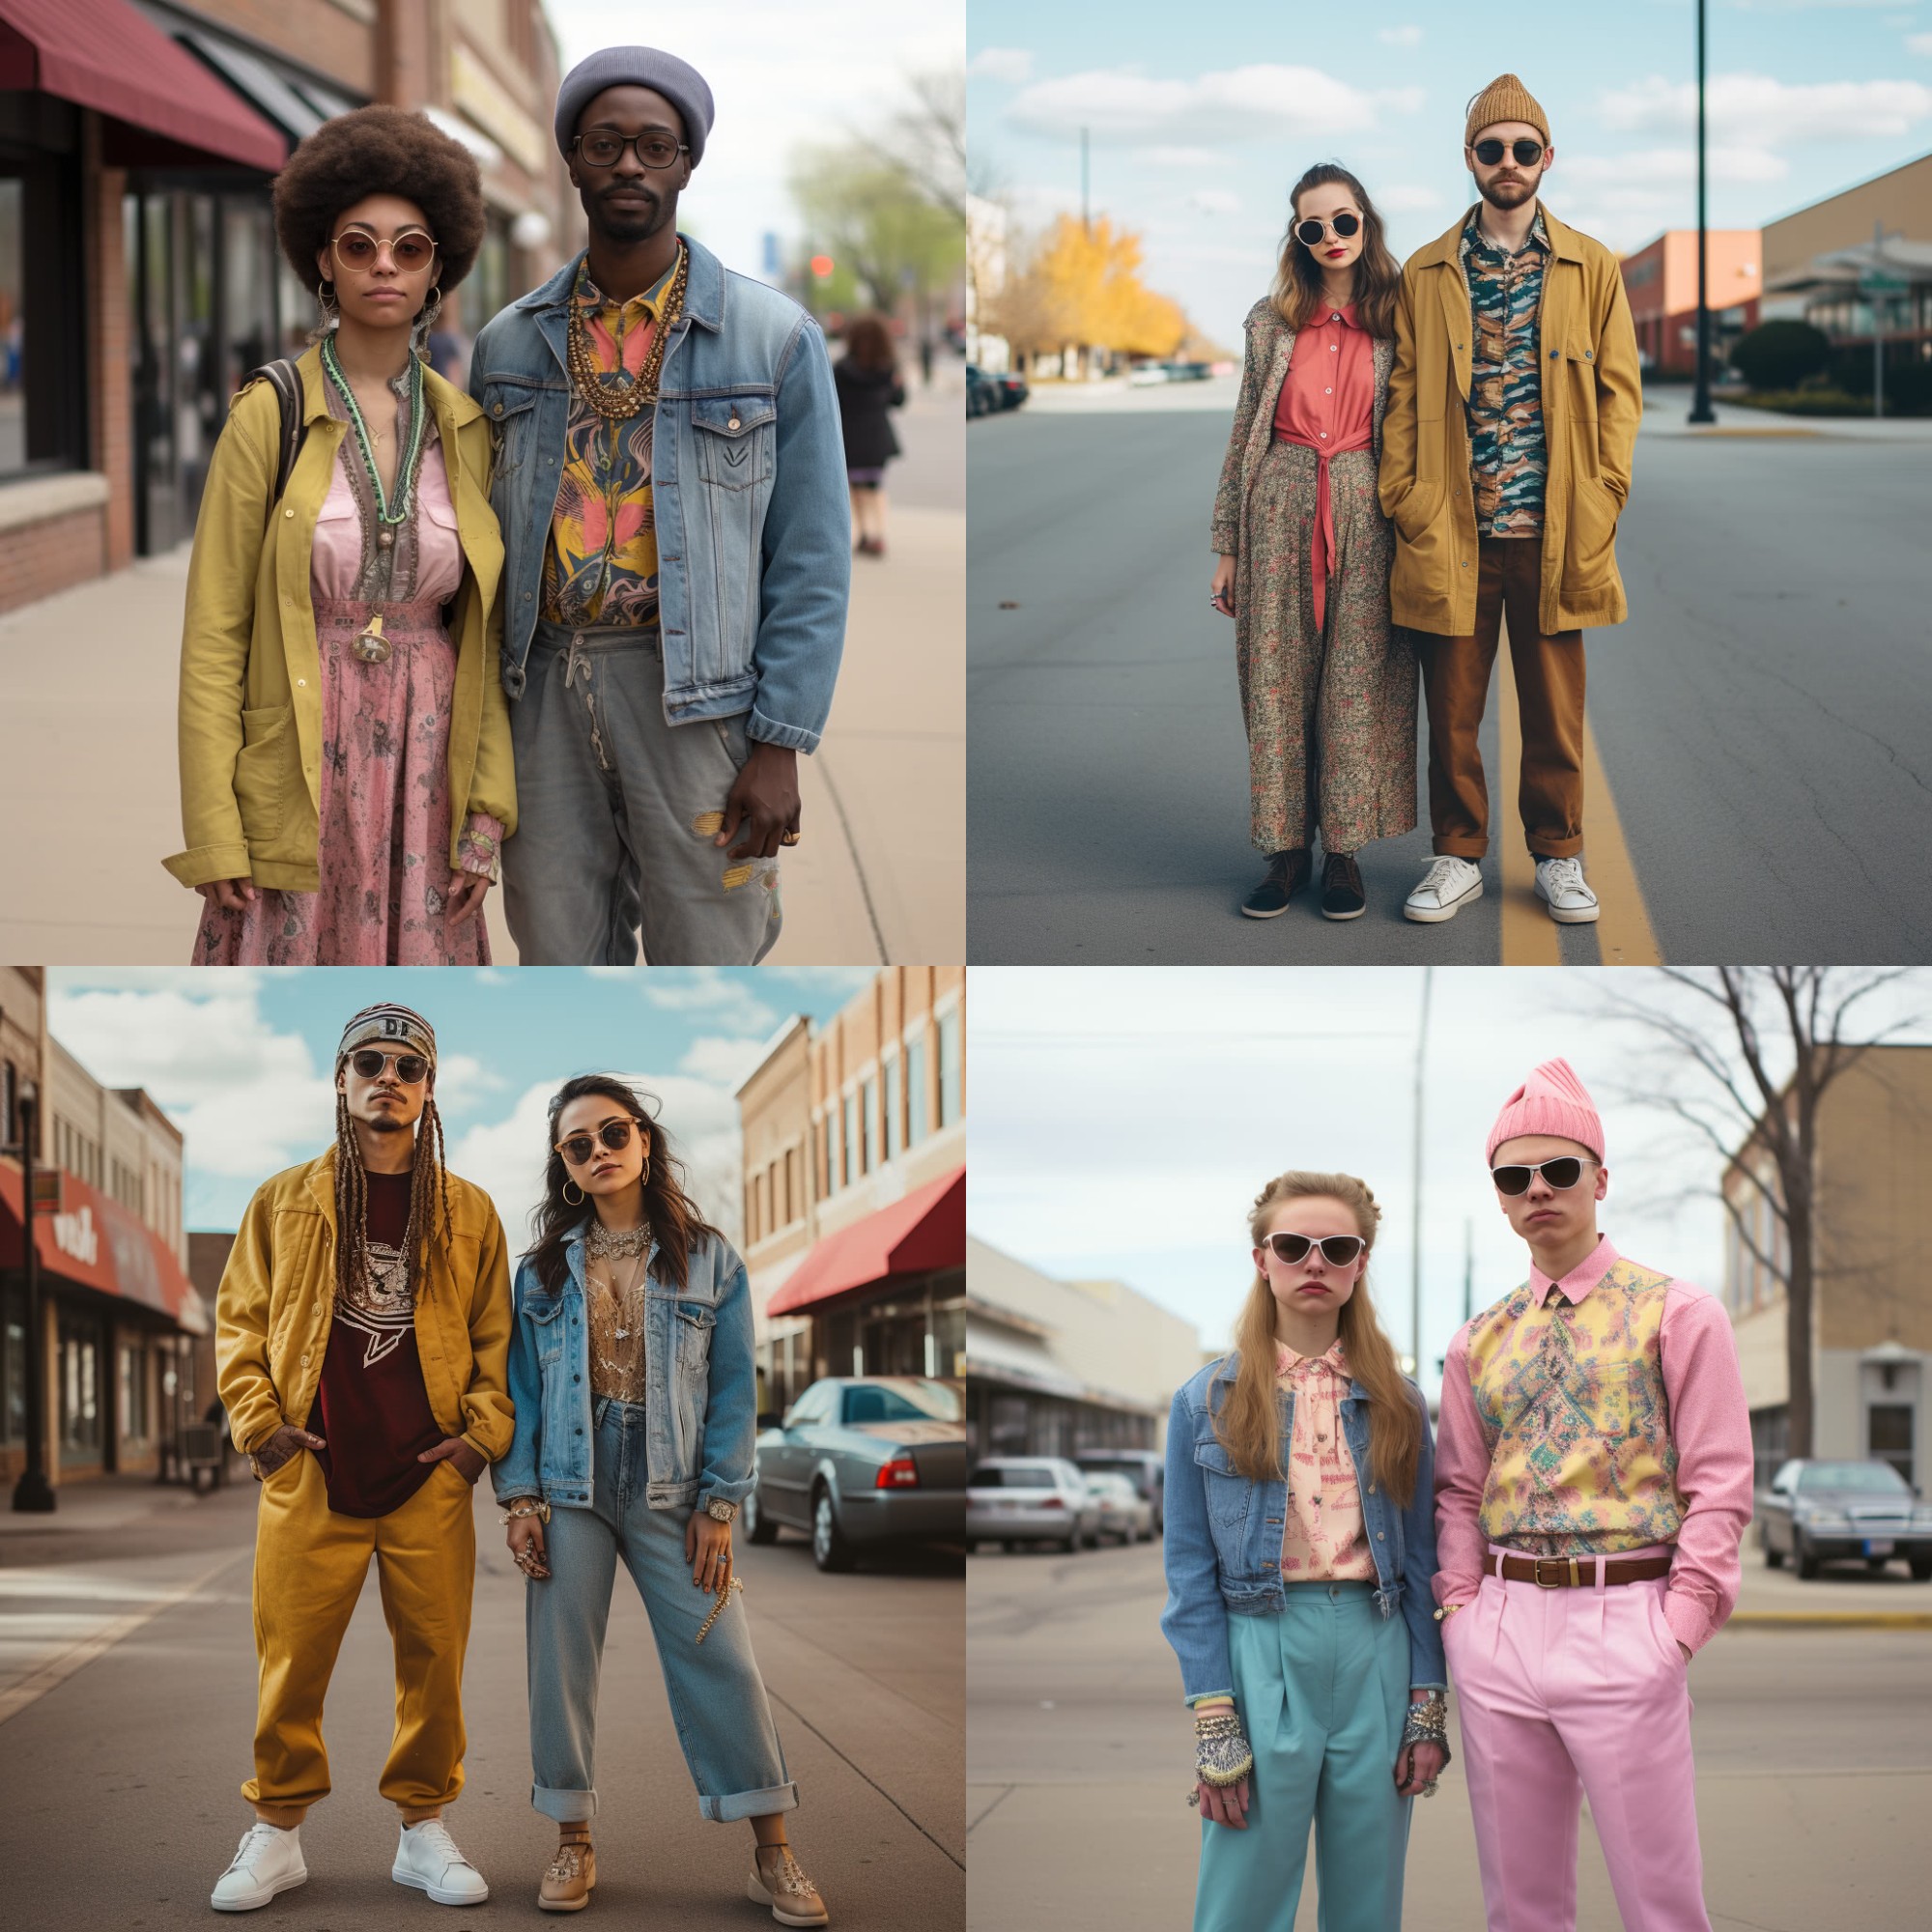 AI curated images of the average fashion style of individuals in Kansas